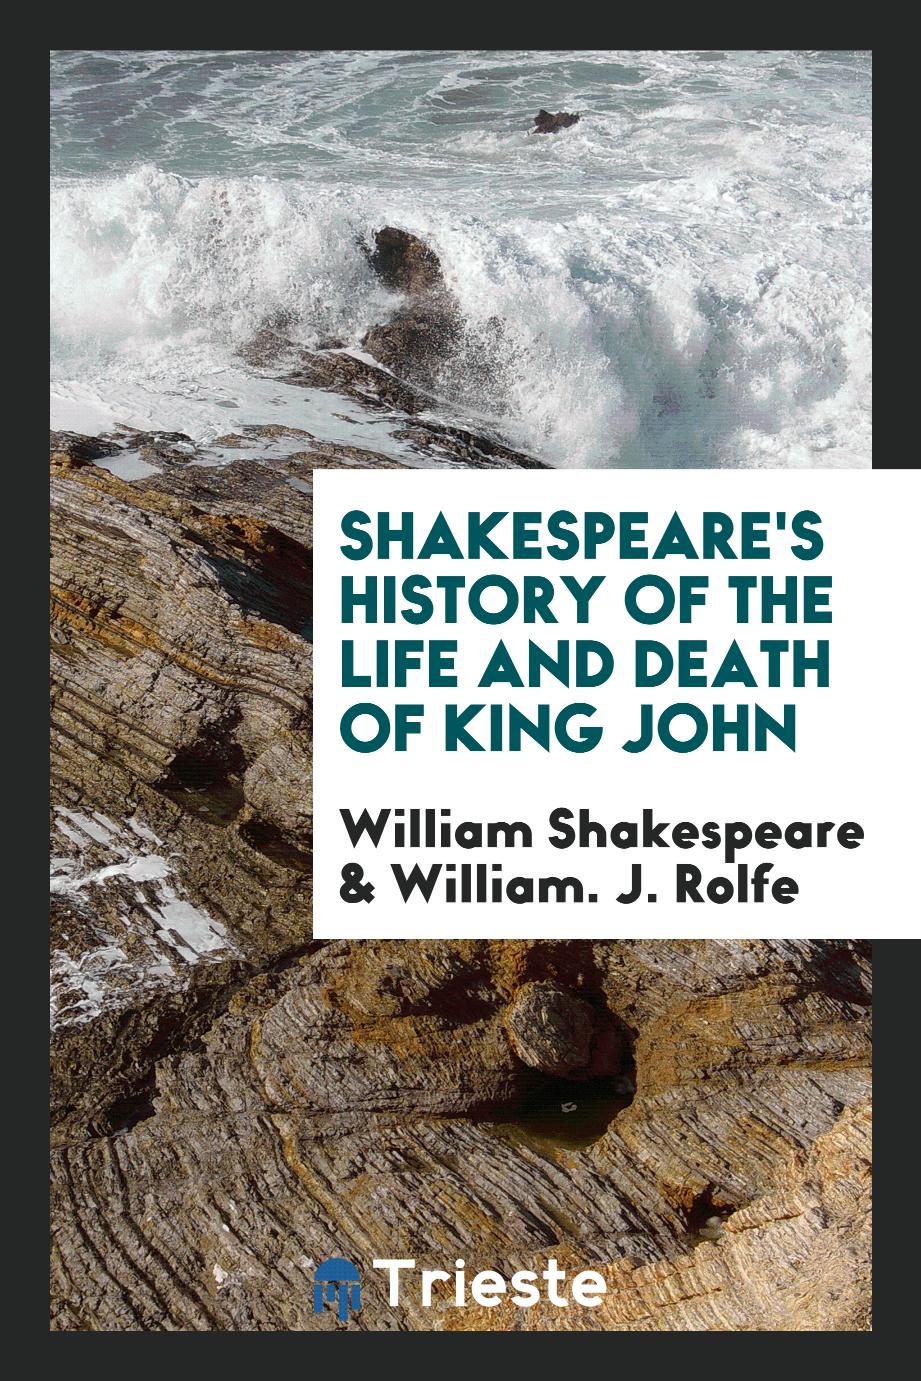 Shakespeare's history of the life and death of King John